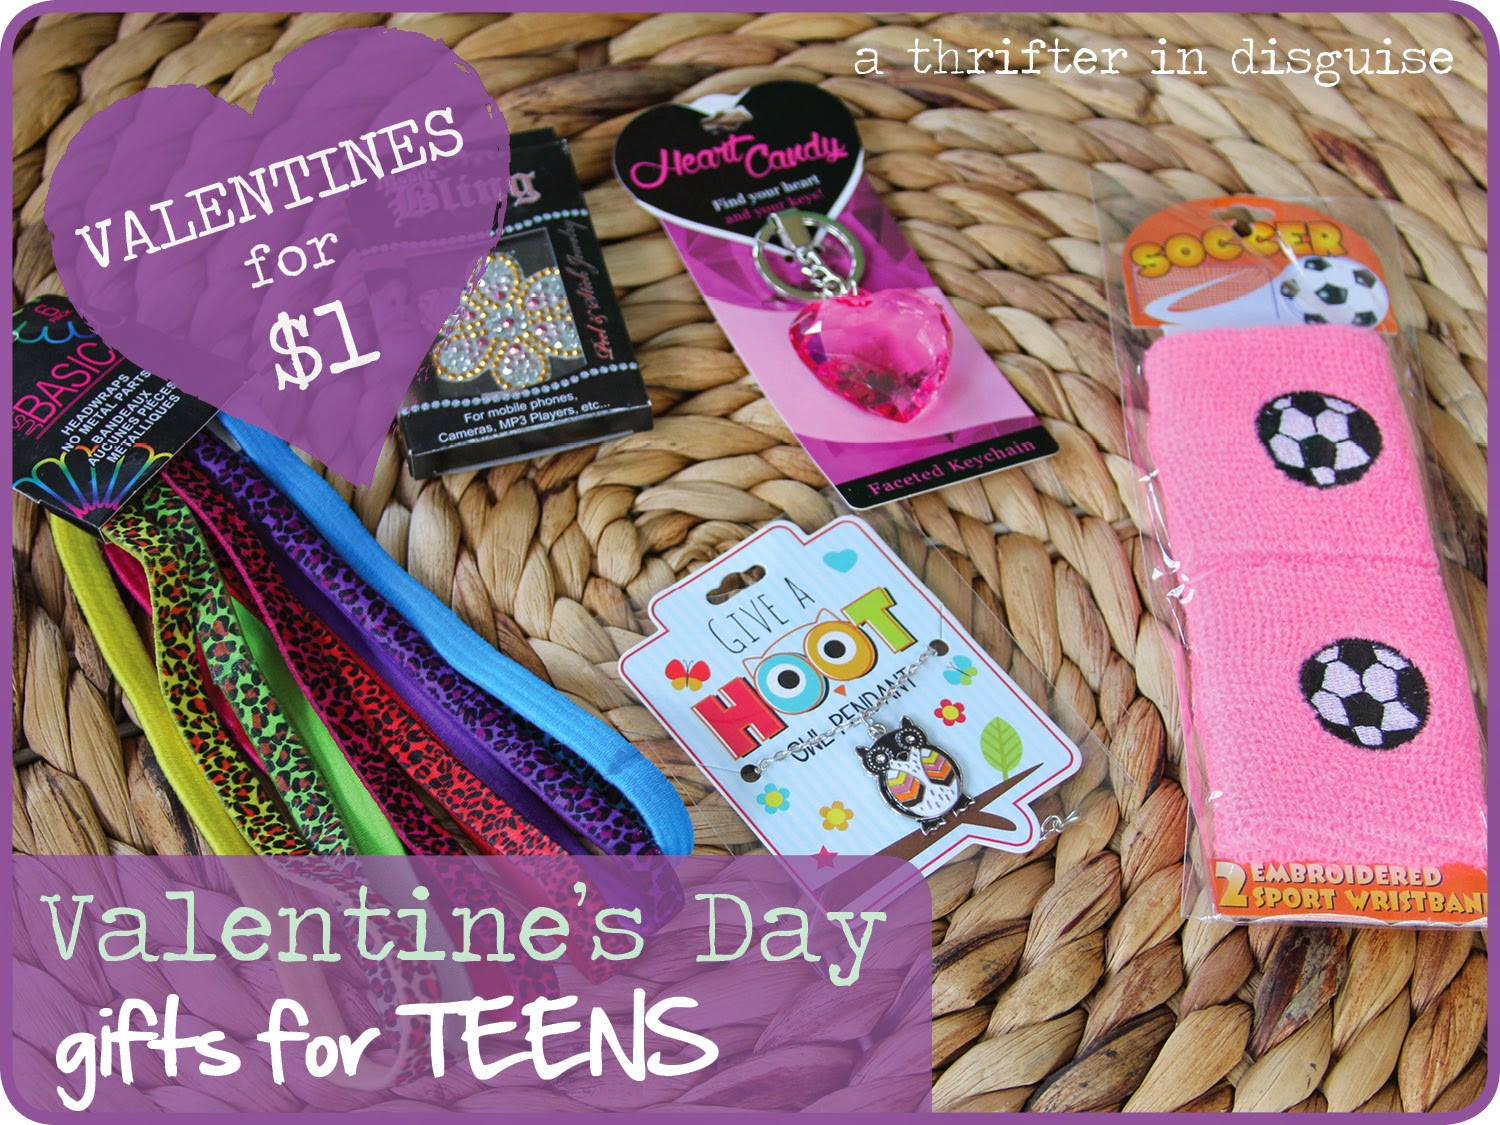 Valentines Day Gifts For Teens
 A Thrifter in Disguise More $1 Valentine s Day Gifts